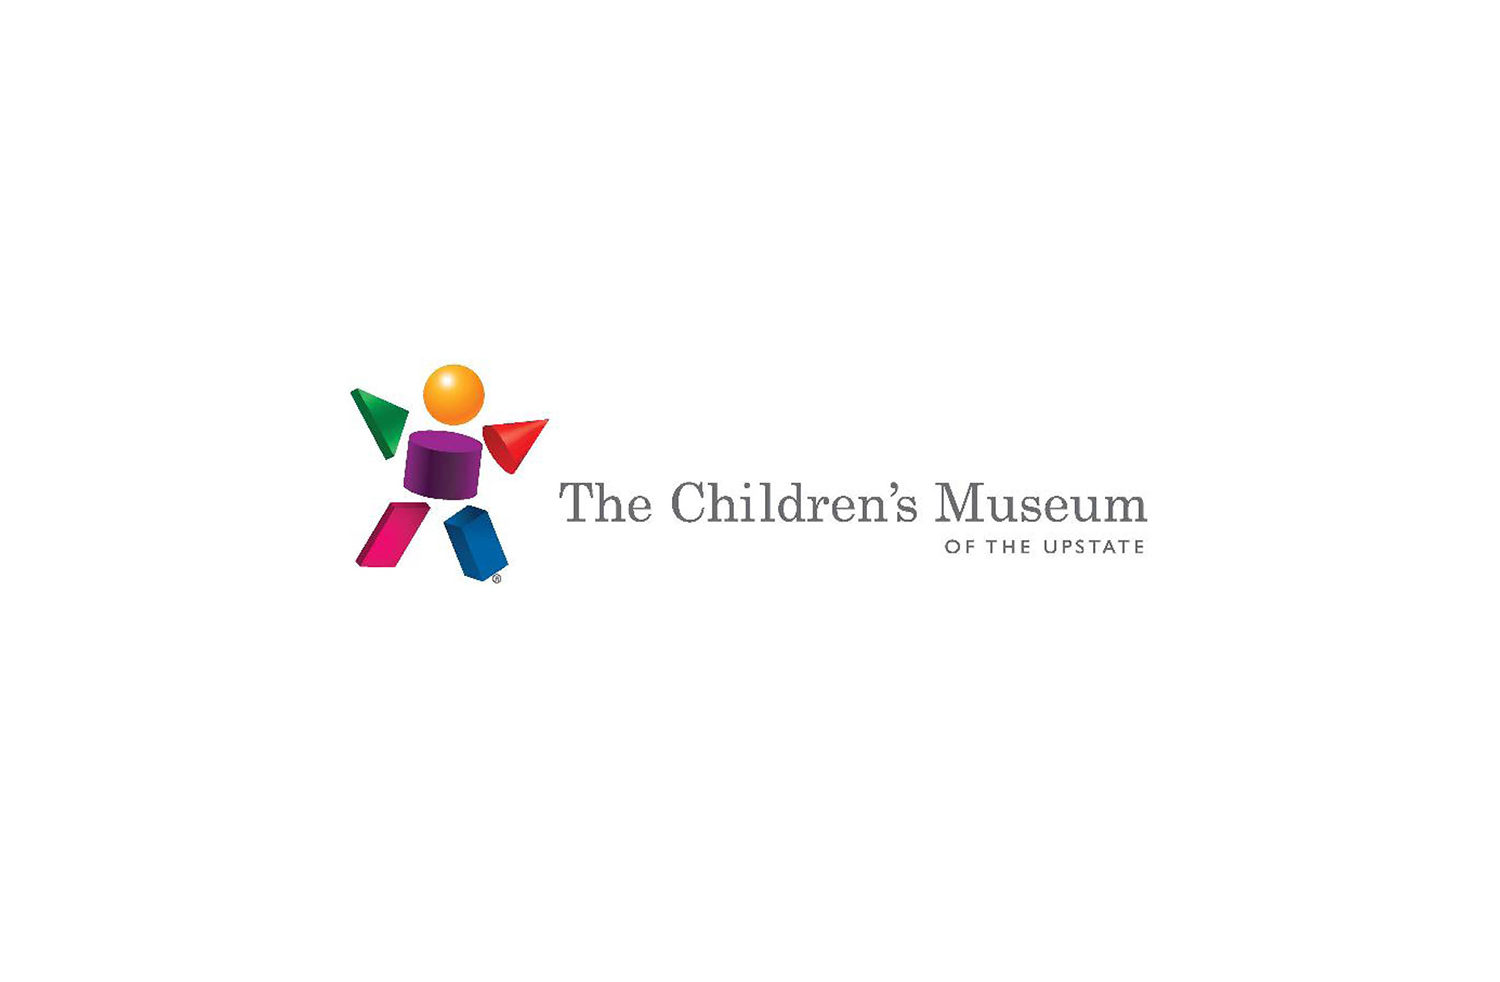 Boss_Display_Client_Childrens_Museum_of_the_Upstate_Logo.jpg